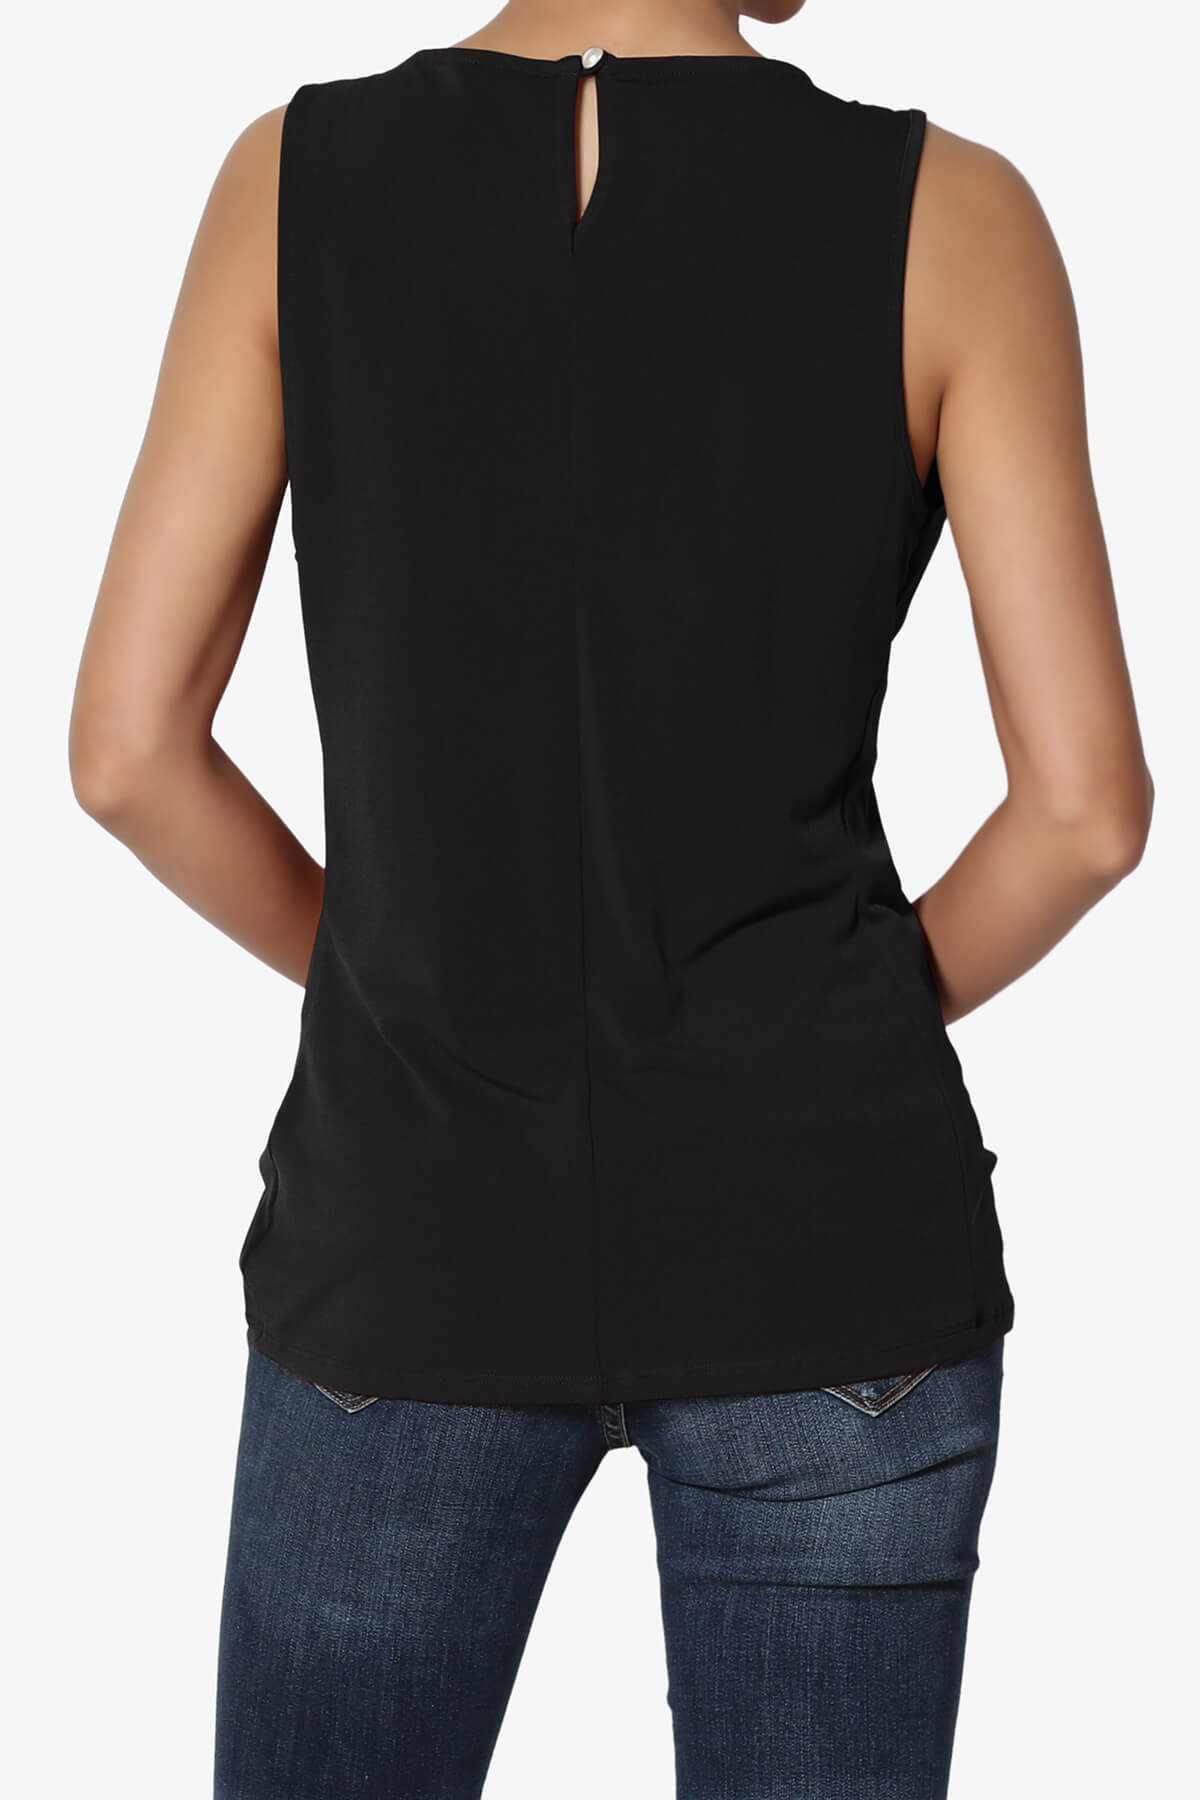 Load image into Gallery viewer, Chaffee Pleat Neck Tank Top BLACK_2
